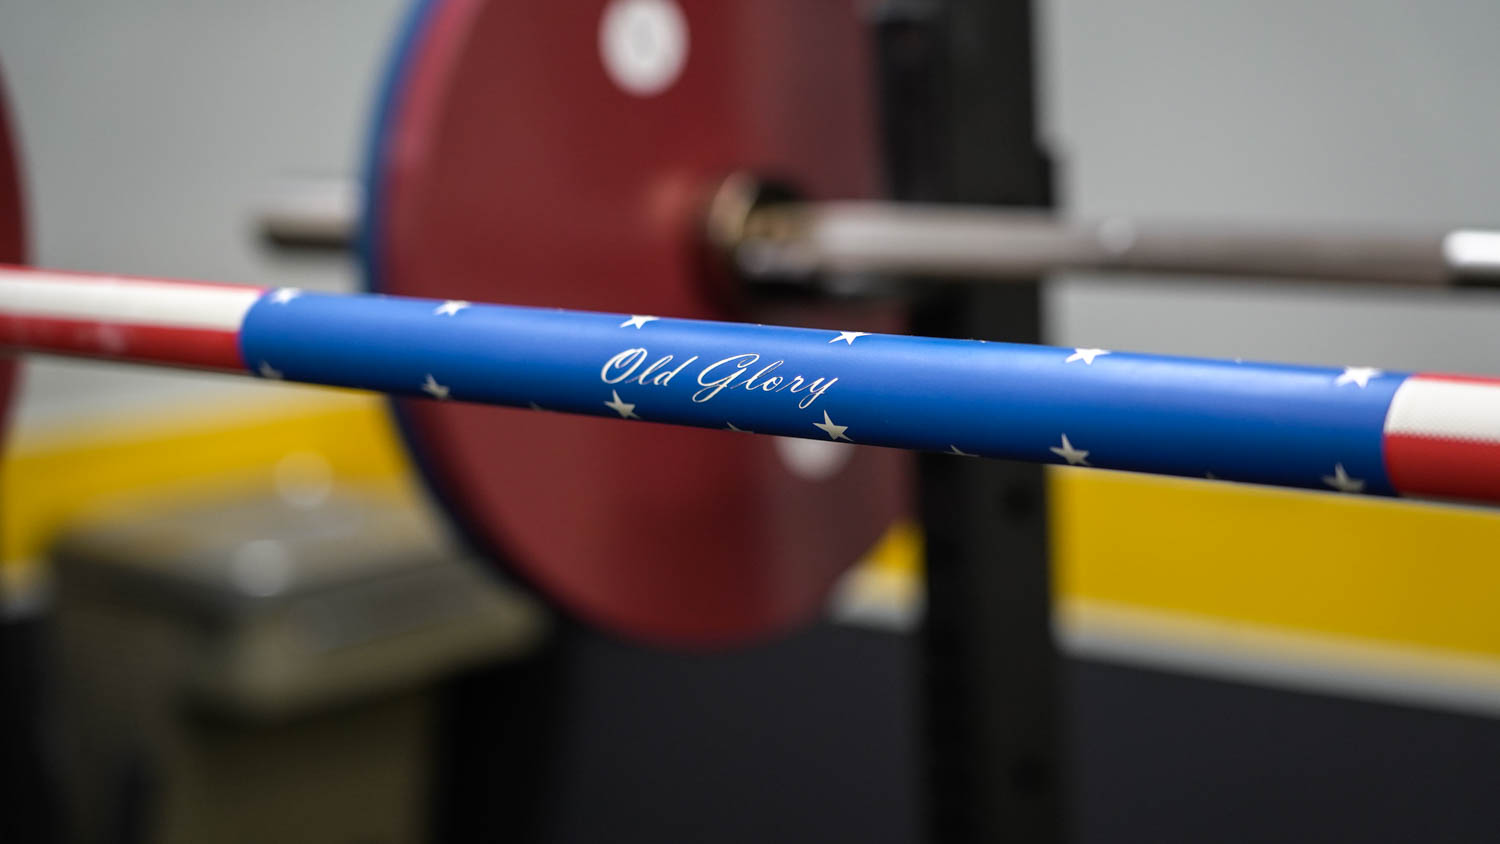 Believe Gear Liberty Cerakote Barbell In-Depth Review Cover Image